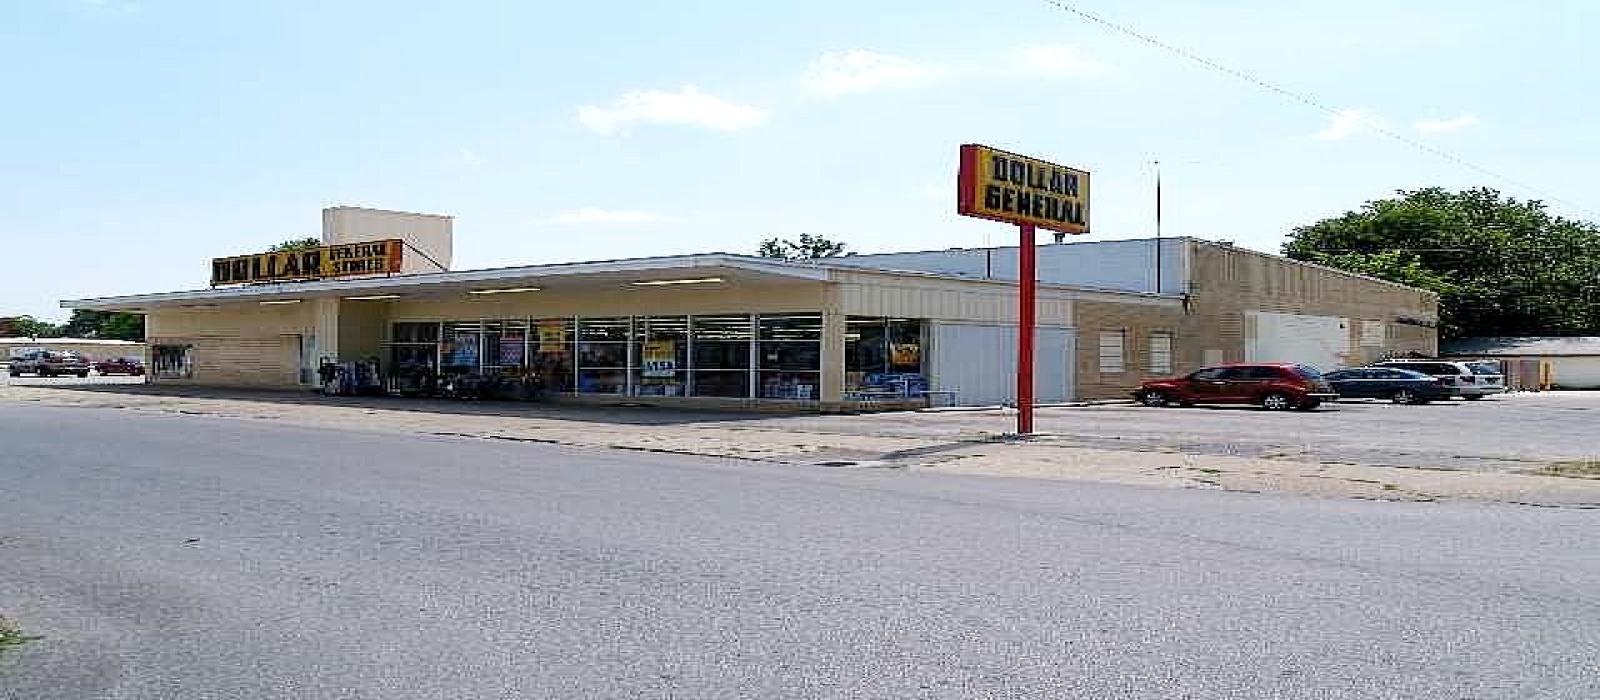 1001 N. 8th Street, Vincennes, Indiana 47591, ,Retail,For Sale,1001 N. 8th Street,1087